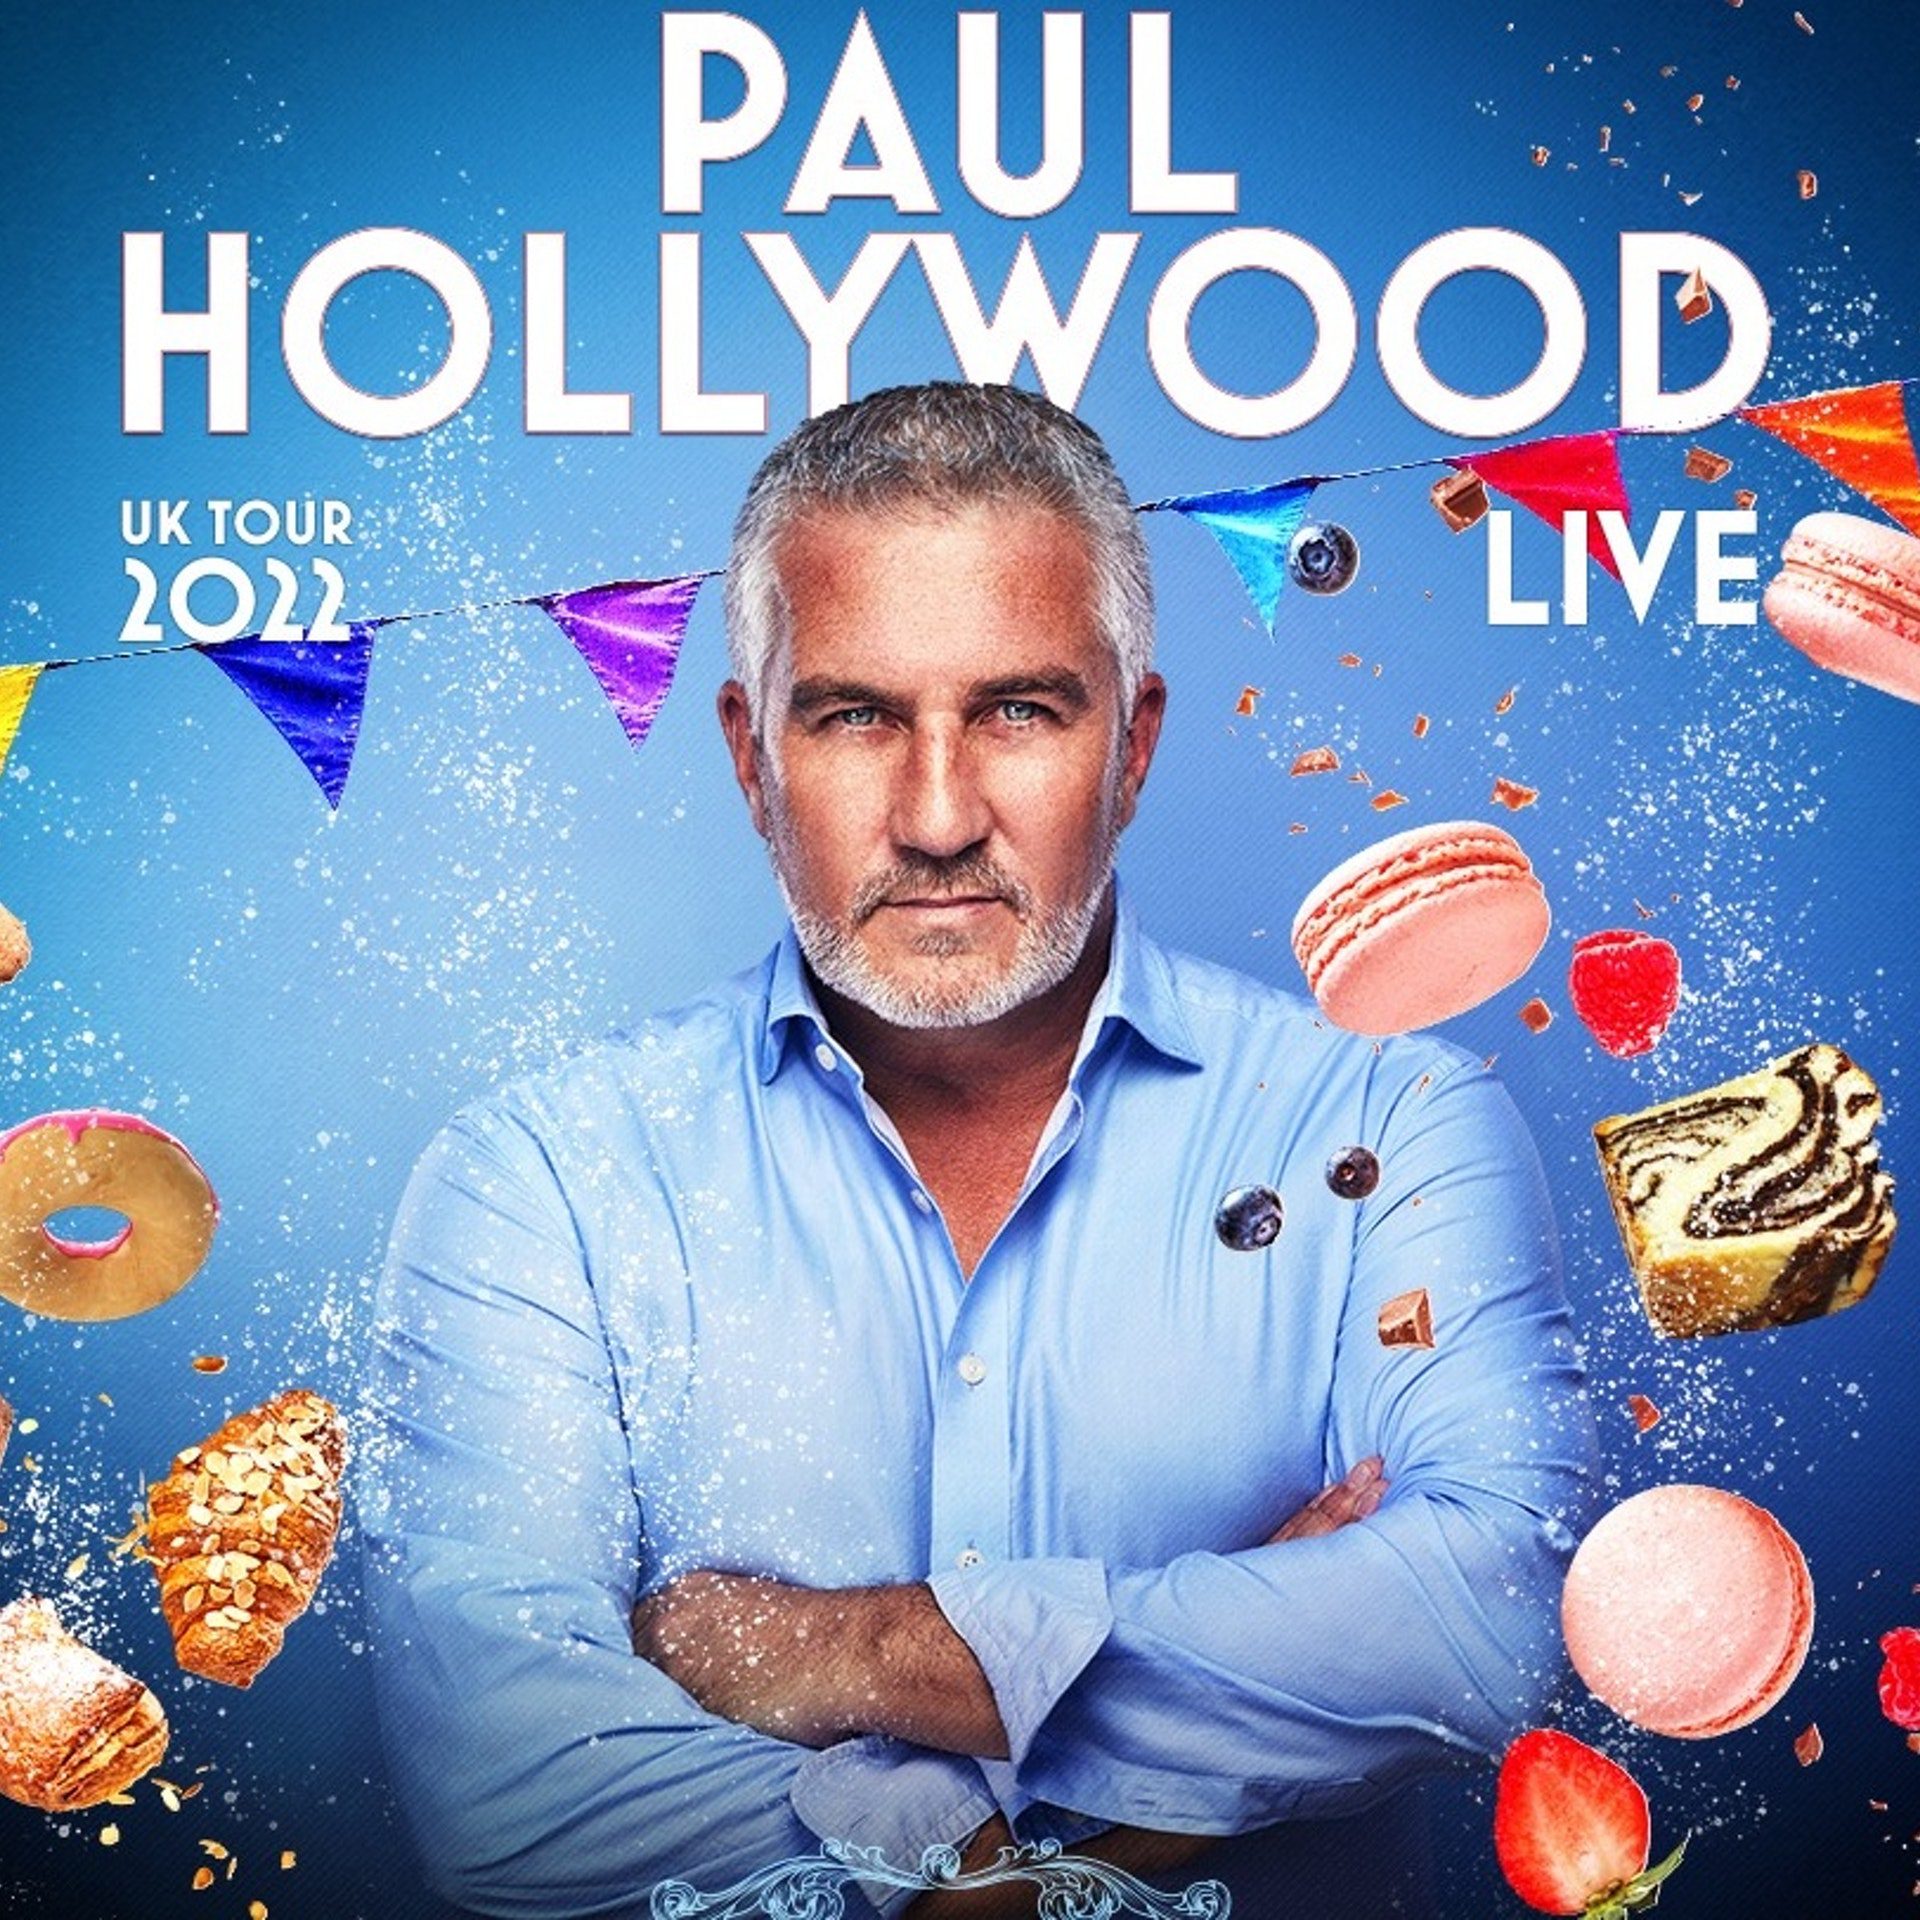 GBBO STAR PAUL HOLLYWOOD TO HIT THE ROAD WITH BRAND NEW LIVE TOUR